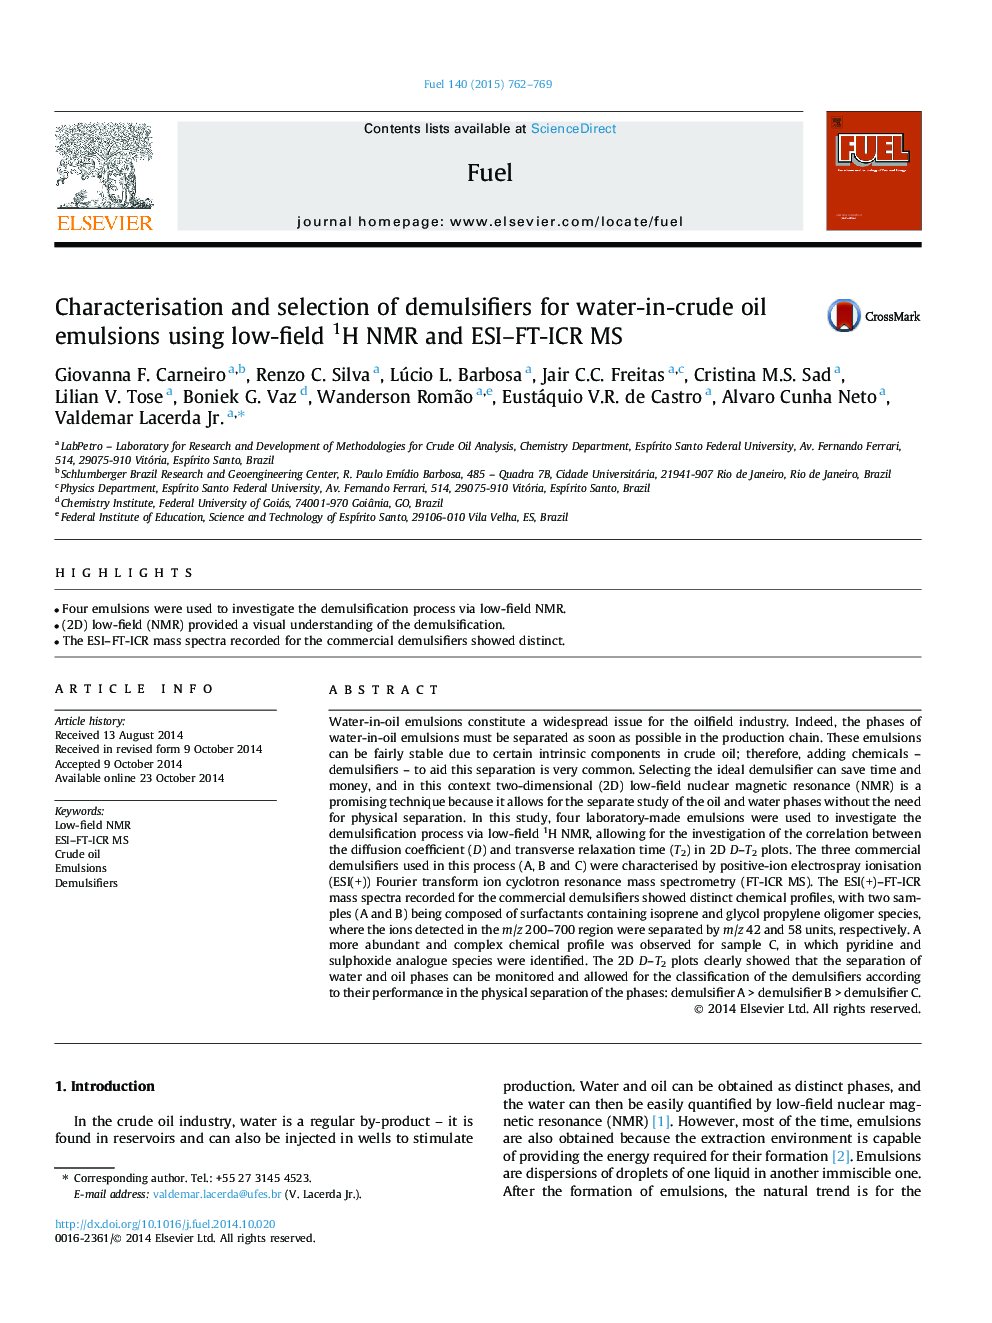 Characterisation and selection of demulsifiers for water-in-crude oil emulsions using low-field 1H NMR and ESI-FT-ICR MS